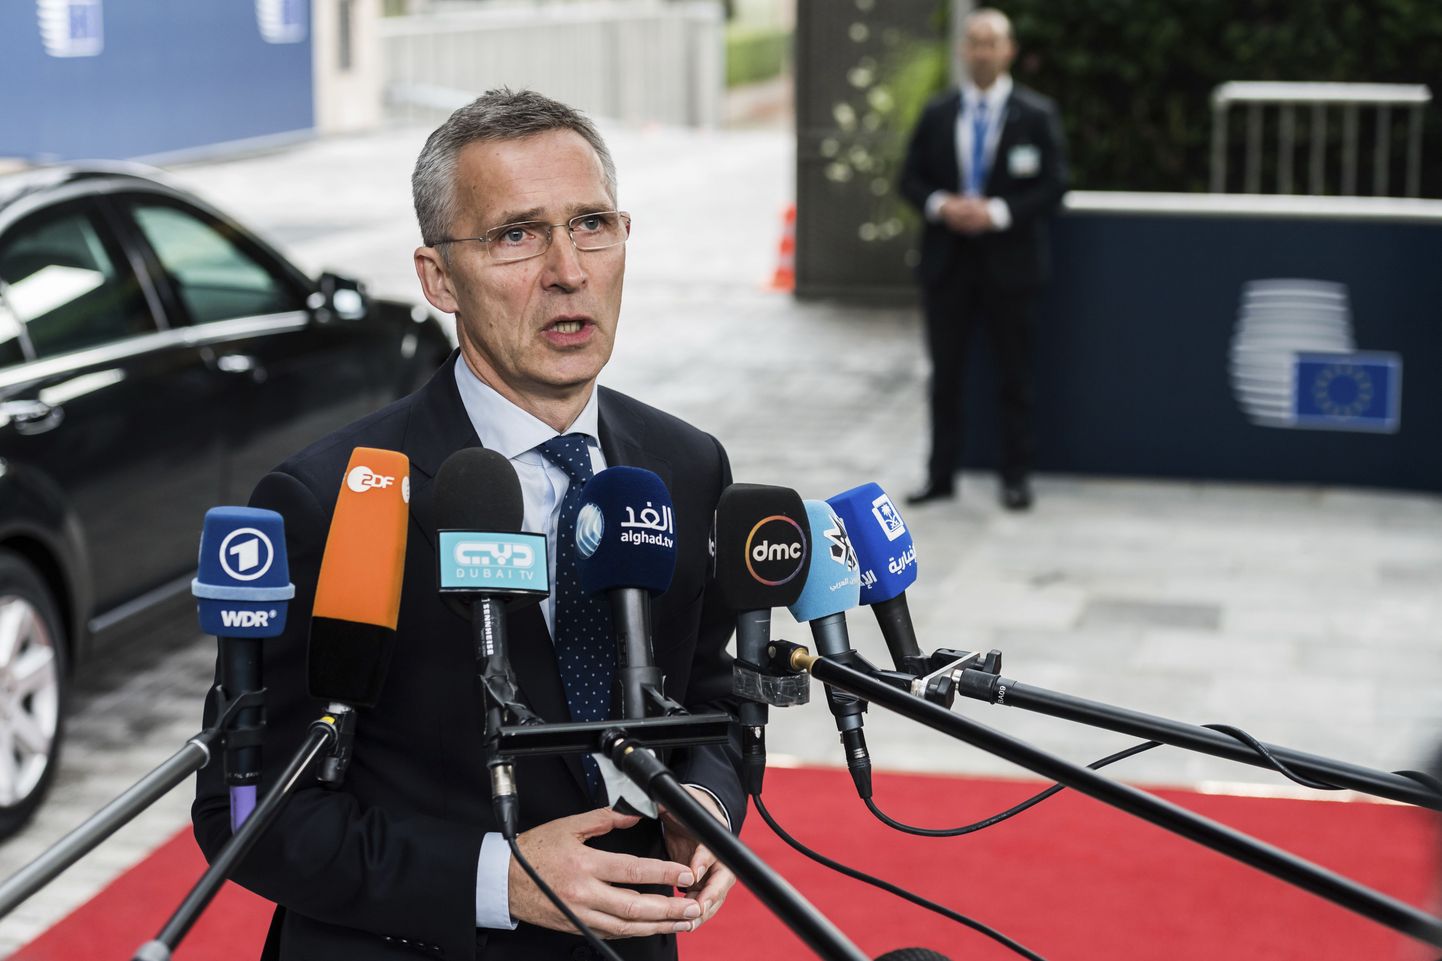 NATO Secretary General Jens Stoltenberg talks with journalists as he arrives for a meeting of EU foreign and defense ministers at the Europa building in Brussels, Thursday May 18, 2017. (AP Photo/Geert Vanden Wijngaert)